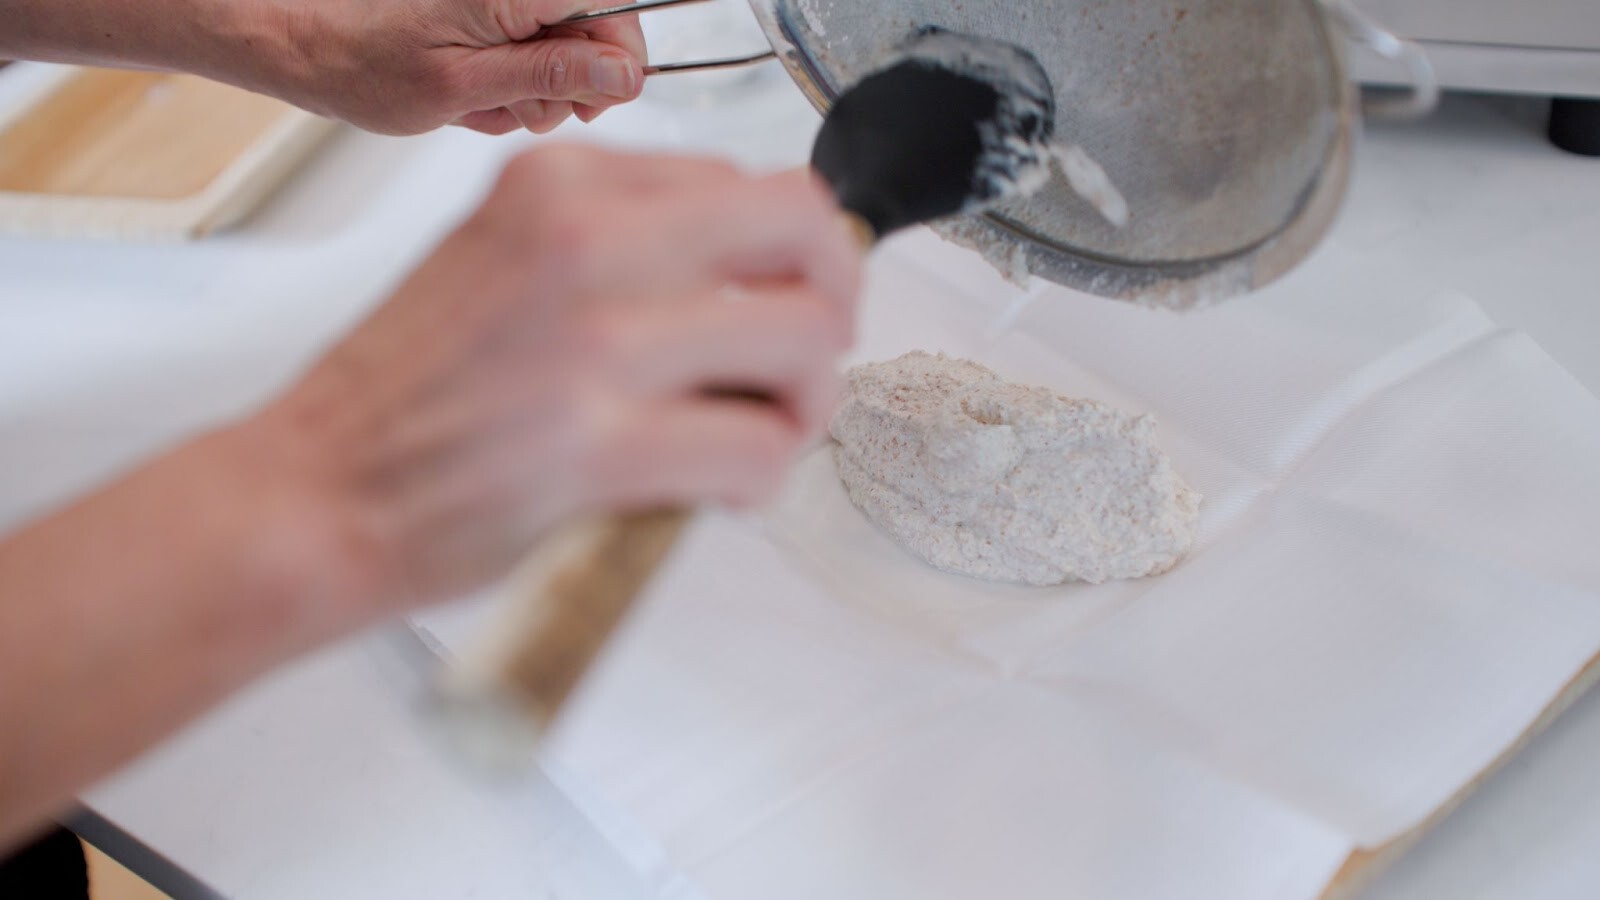 Freshly blended almond meal is scooped onto a PURE press cloth before folding.